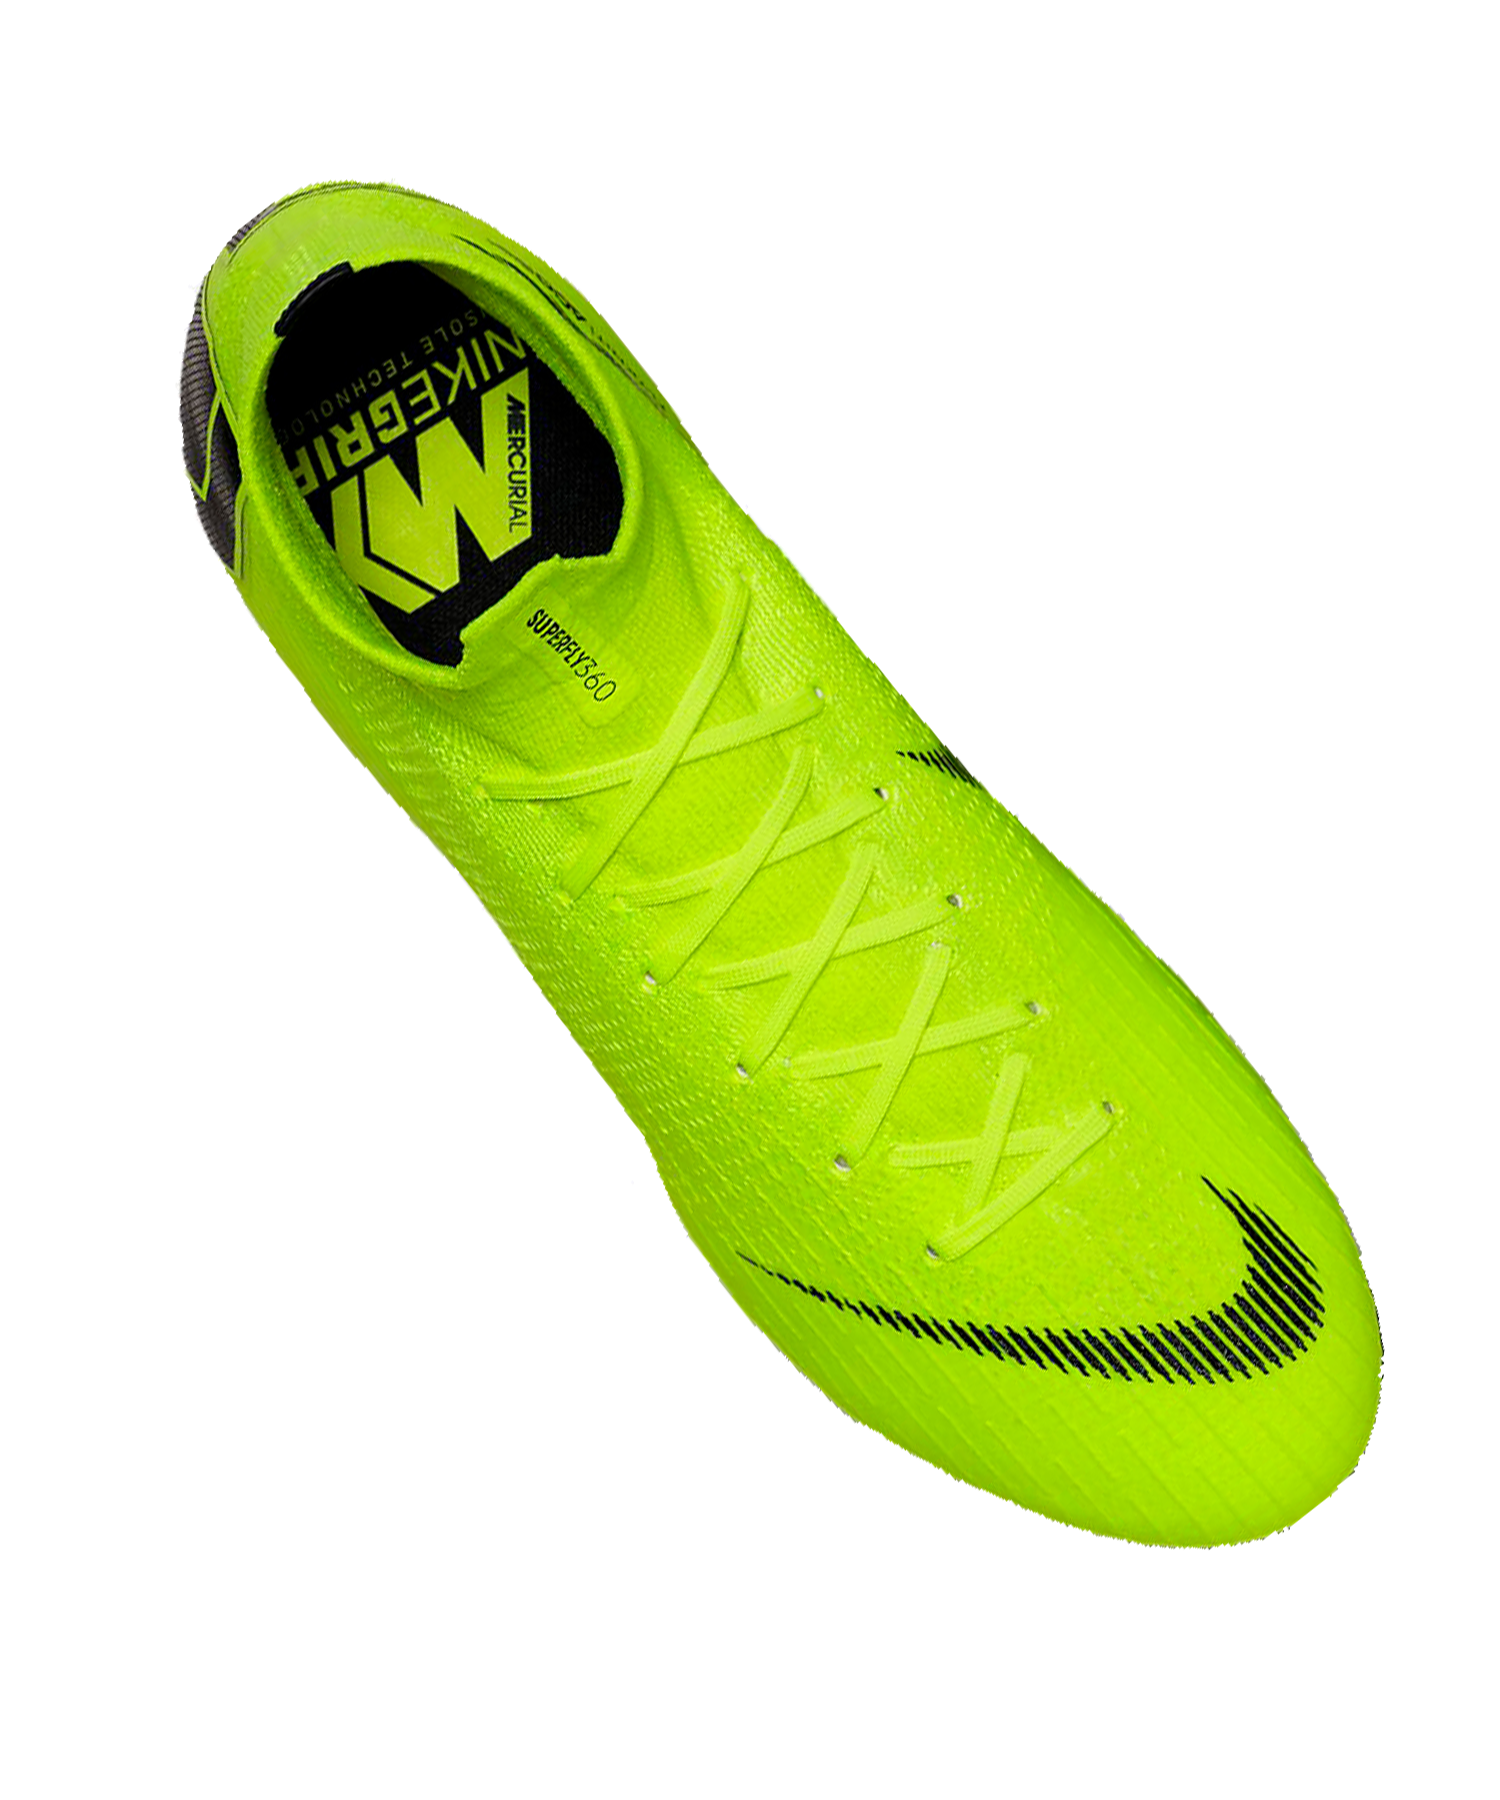 Nike Mercurial Superfly VI Pro CR7 AG PRO from 119.99.